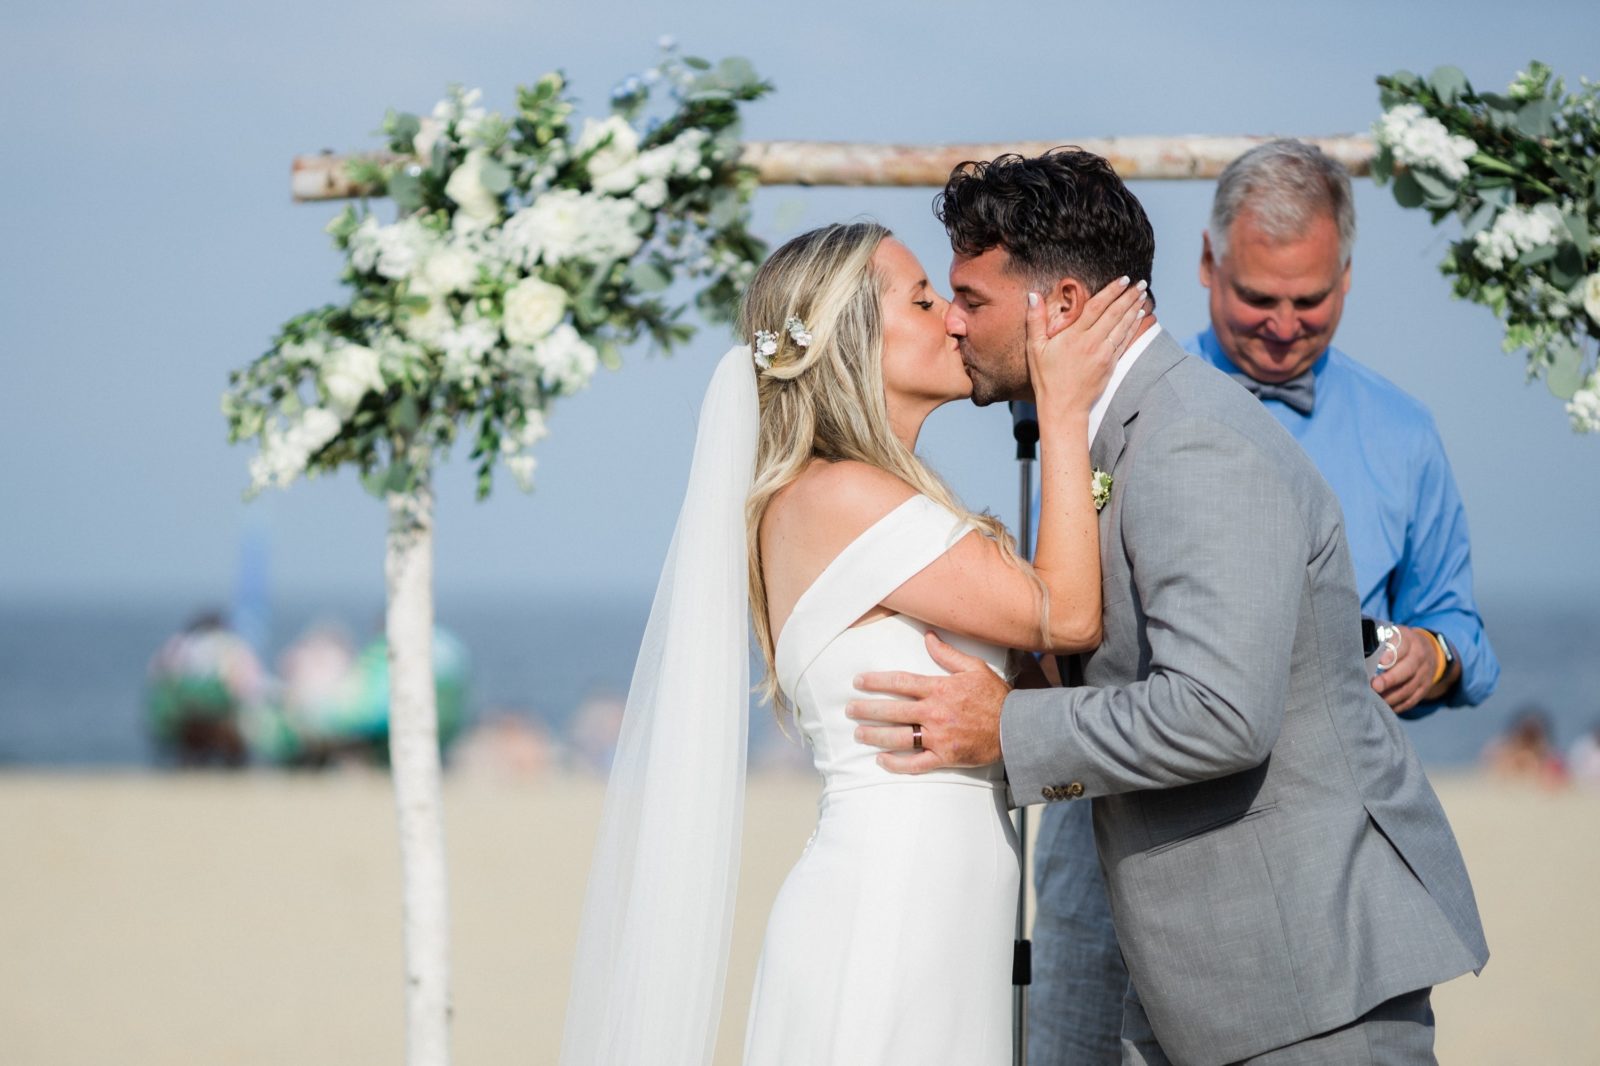 First kiss as husband and wife at the taylor pavilion in Belmar NJ
